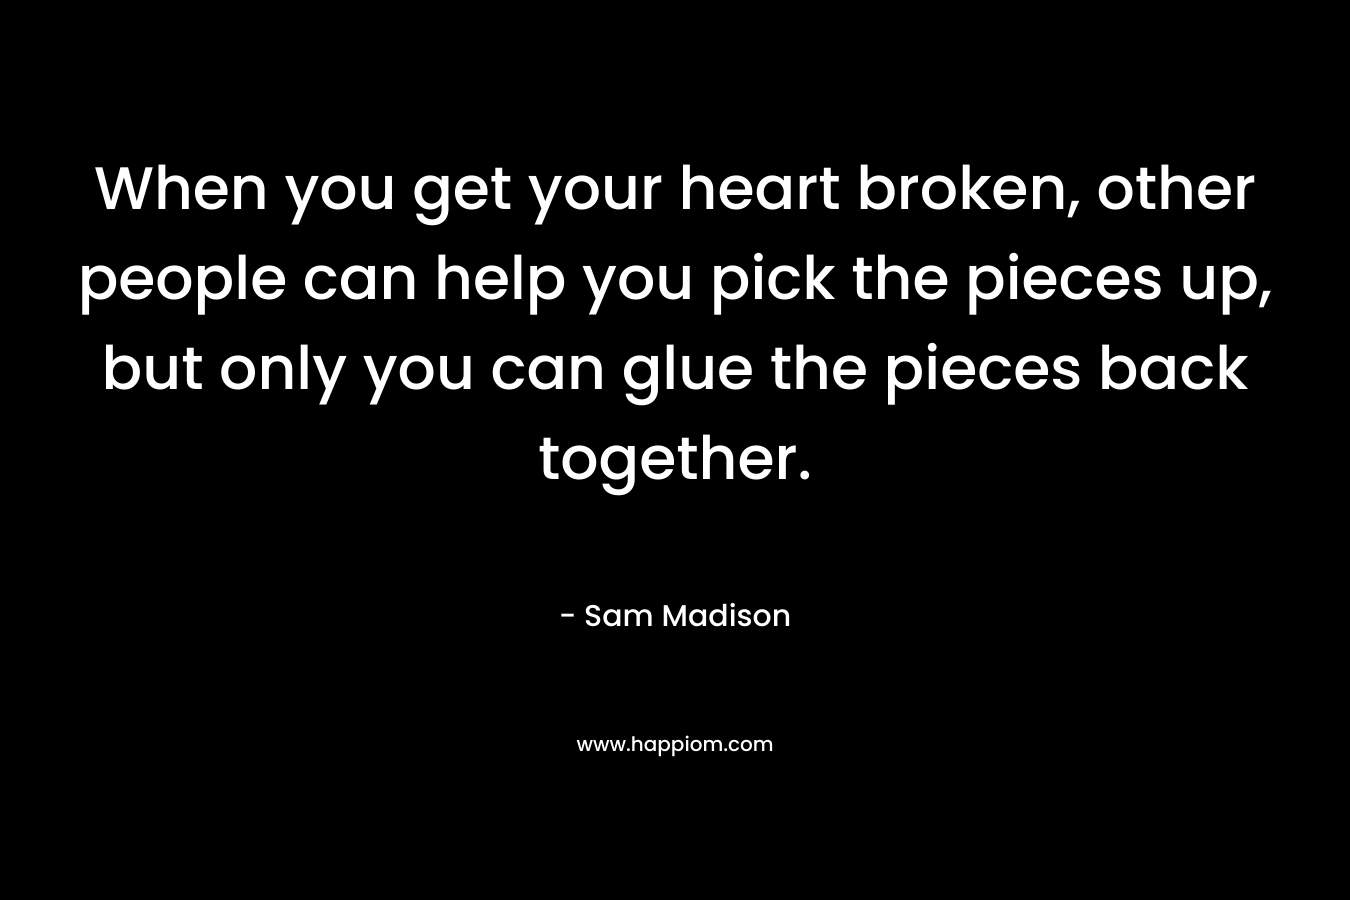 When you get your heart broken, other people can help you pick the pieces up, but only you can glue the pieces back together.